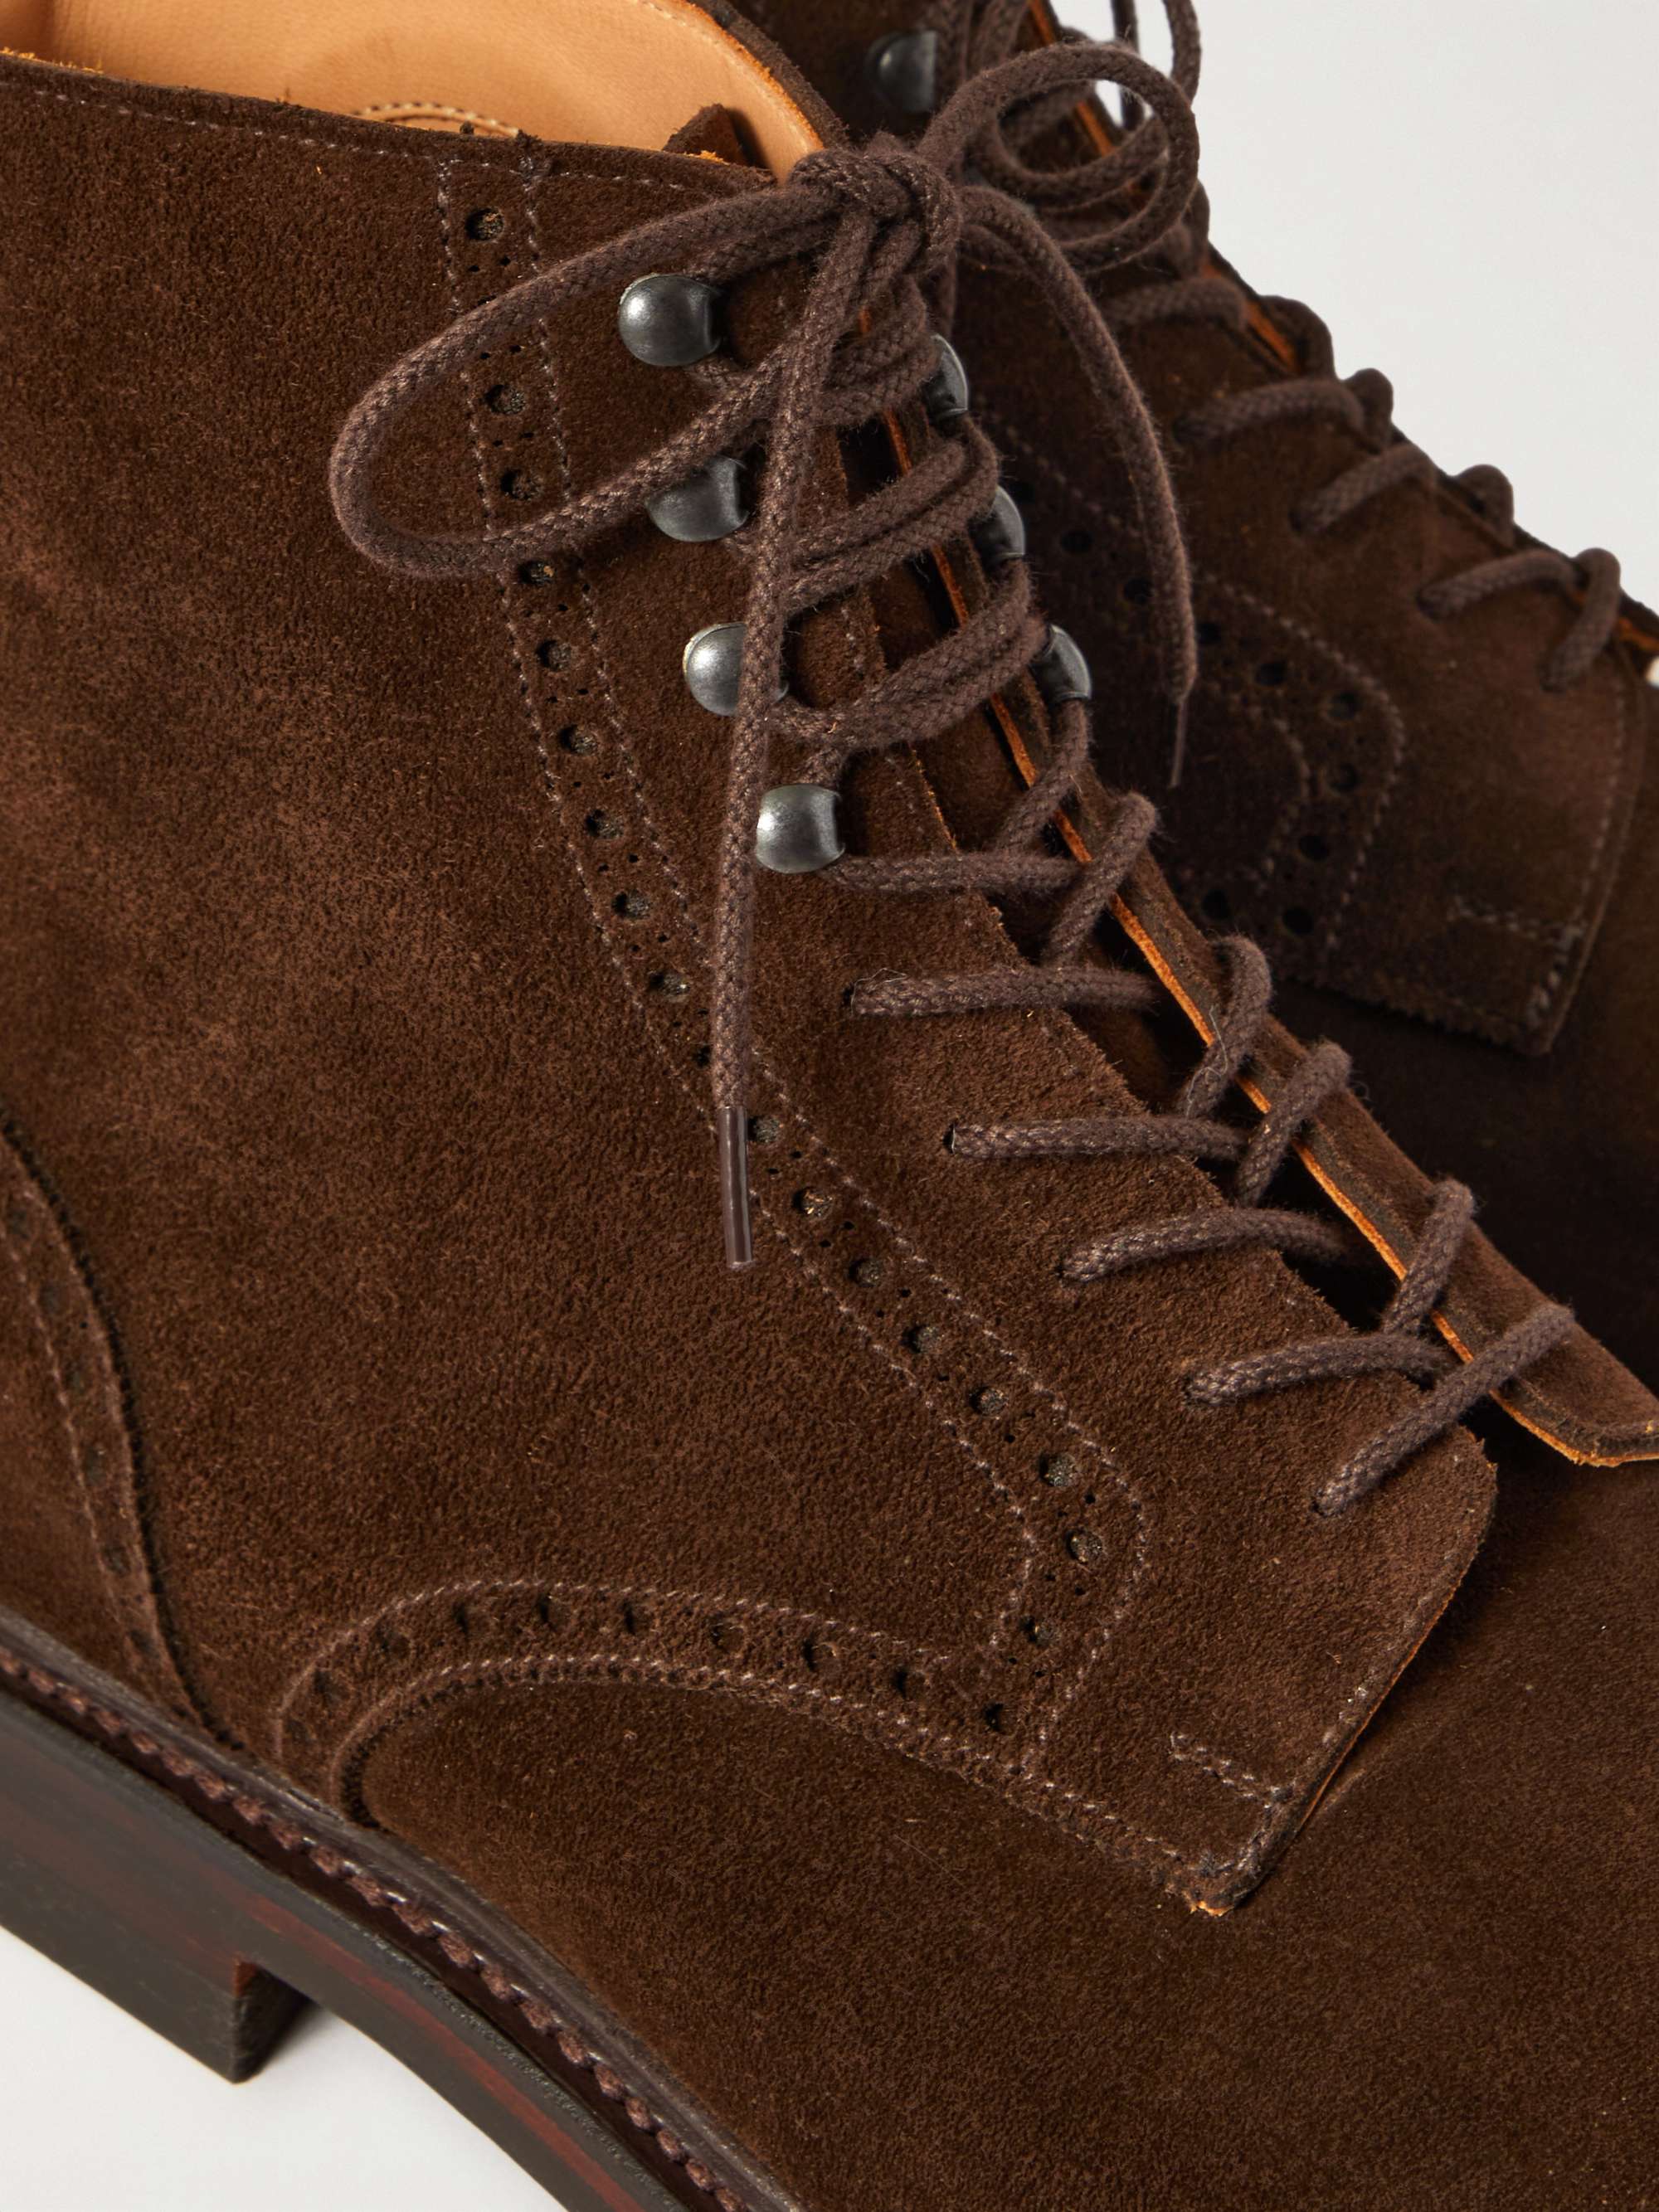 GEORGE CLEVERLEY Toby Suede Brogue Boots